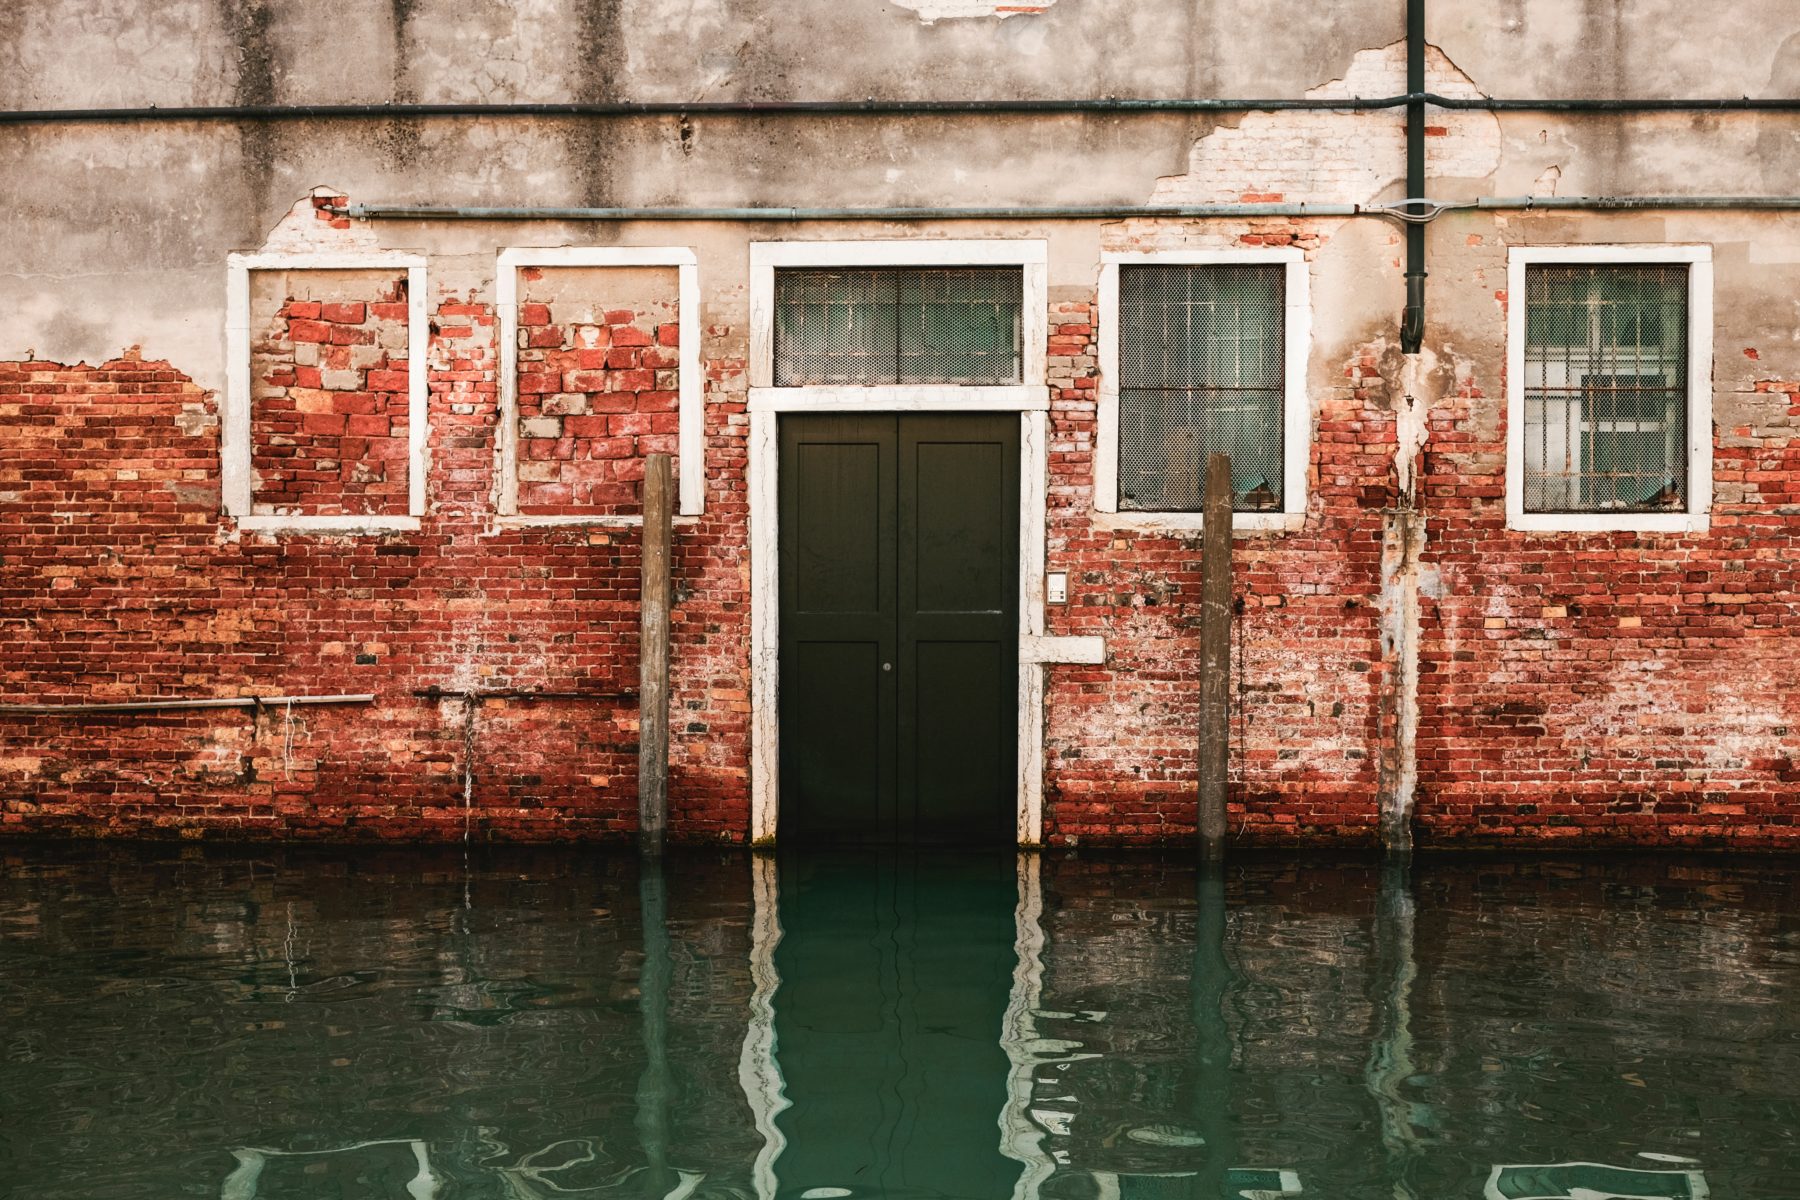 High waters against a red brick home in Venice, Italy.